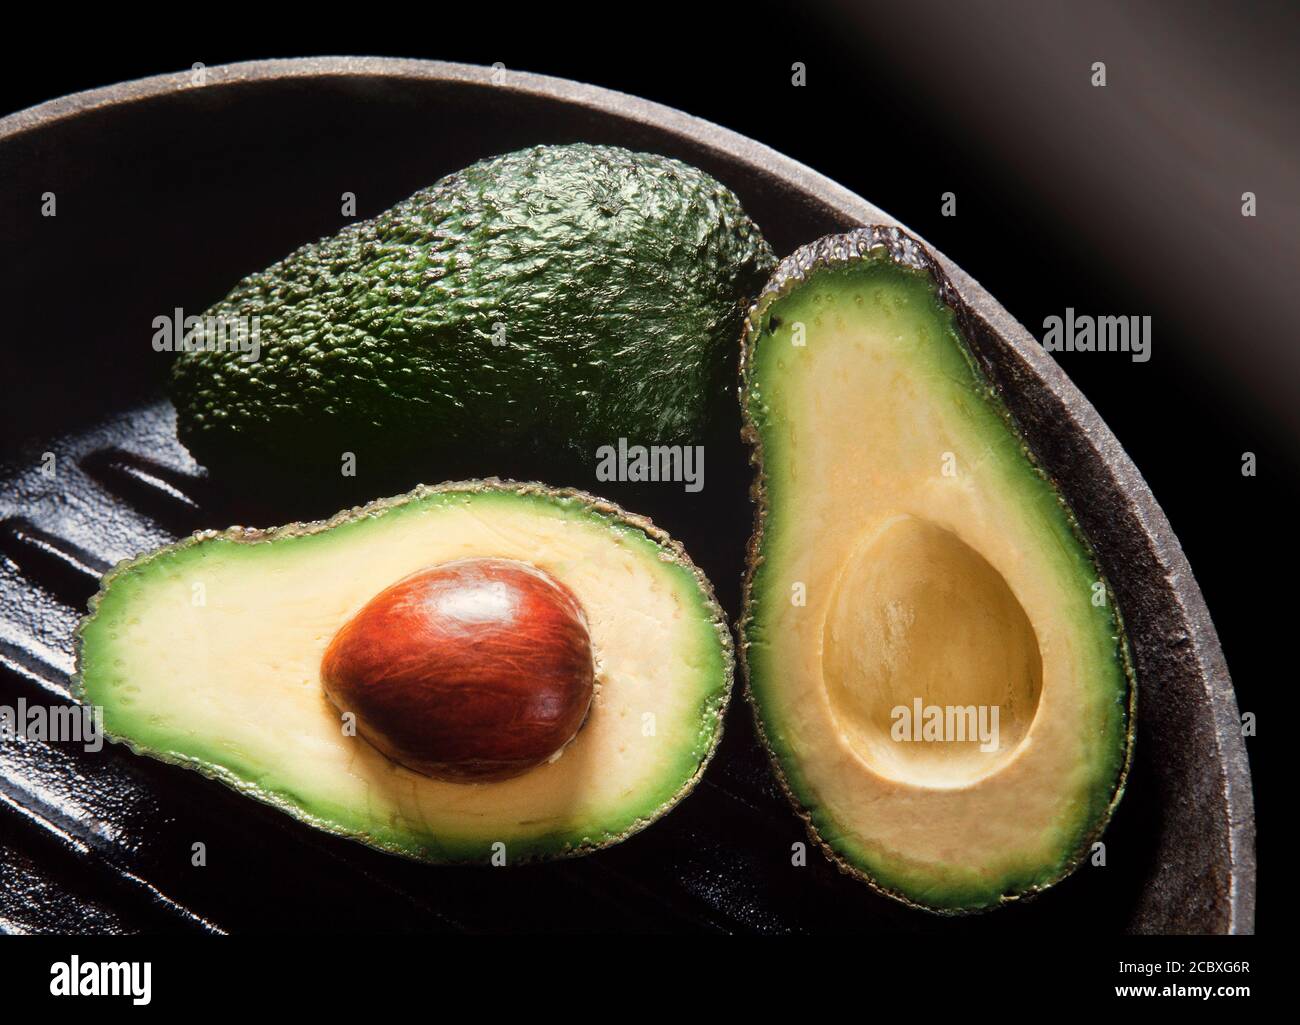 Avocado pear, Persea americana, split open showing flesh and large nut. Stock Photo